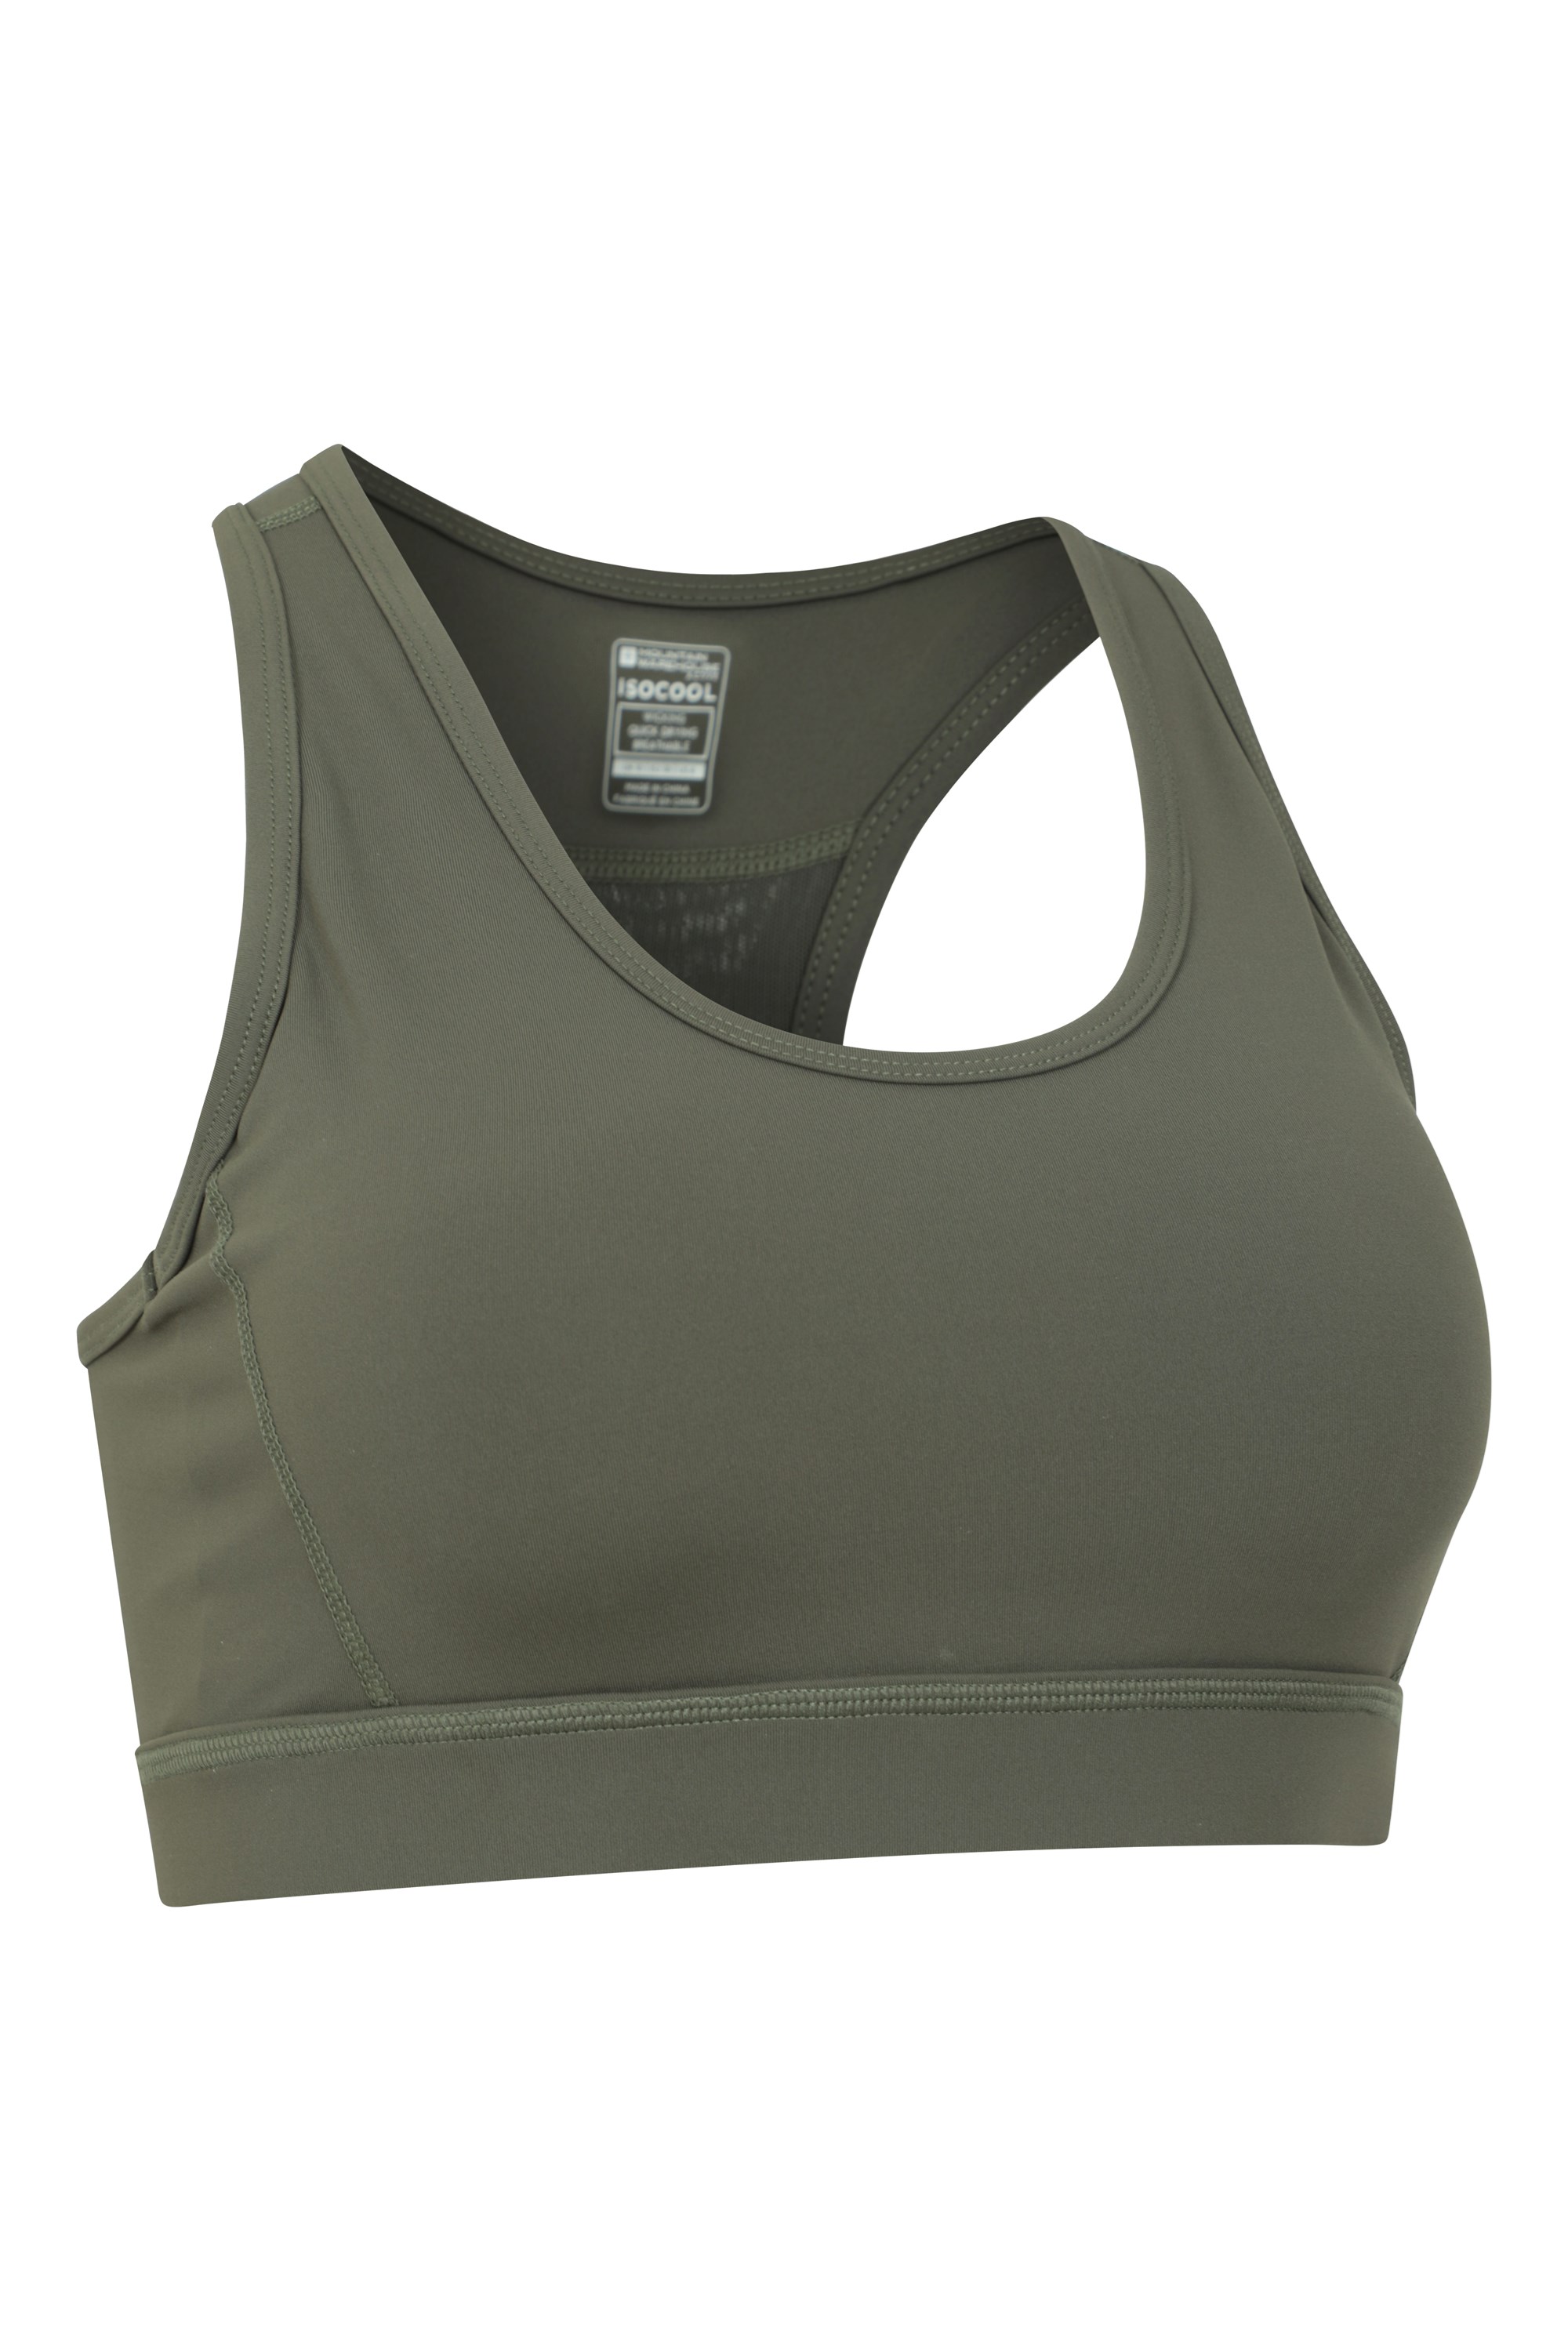 Mountain Warehouse Bounce Buster Womens Sports Bra - Ladies Gym